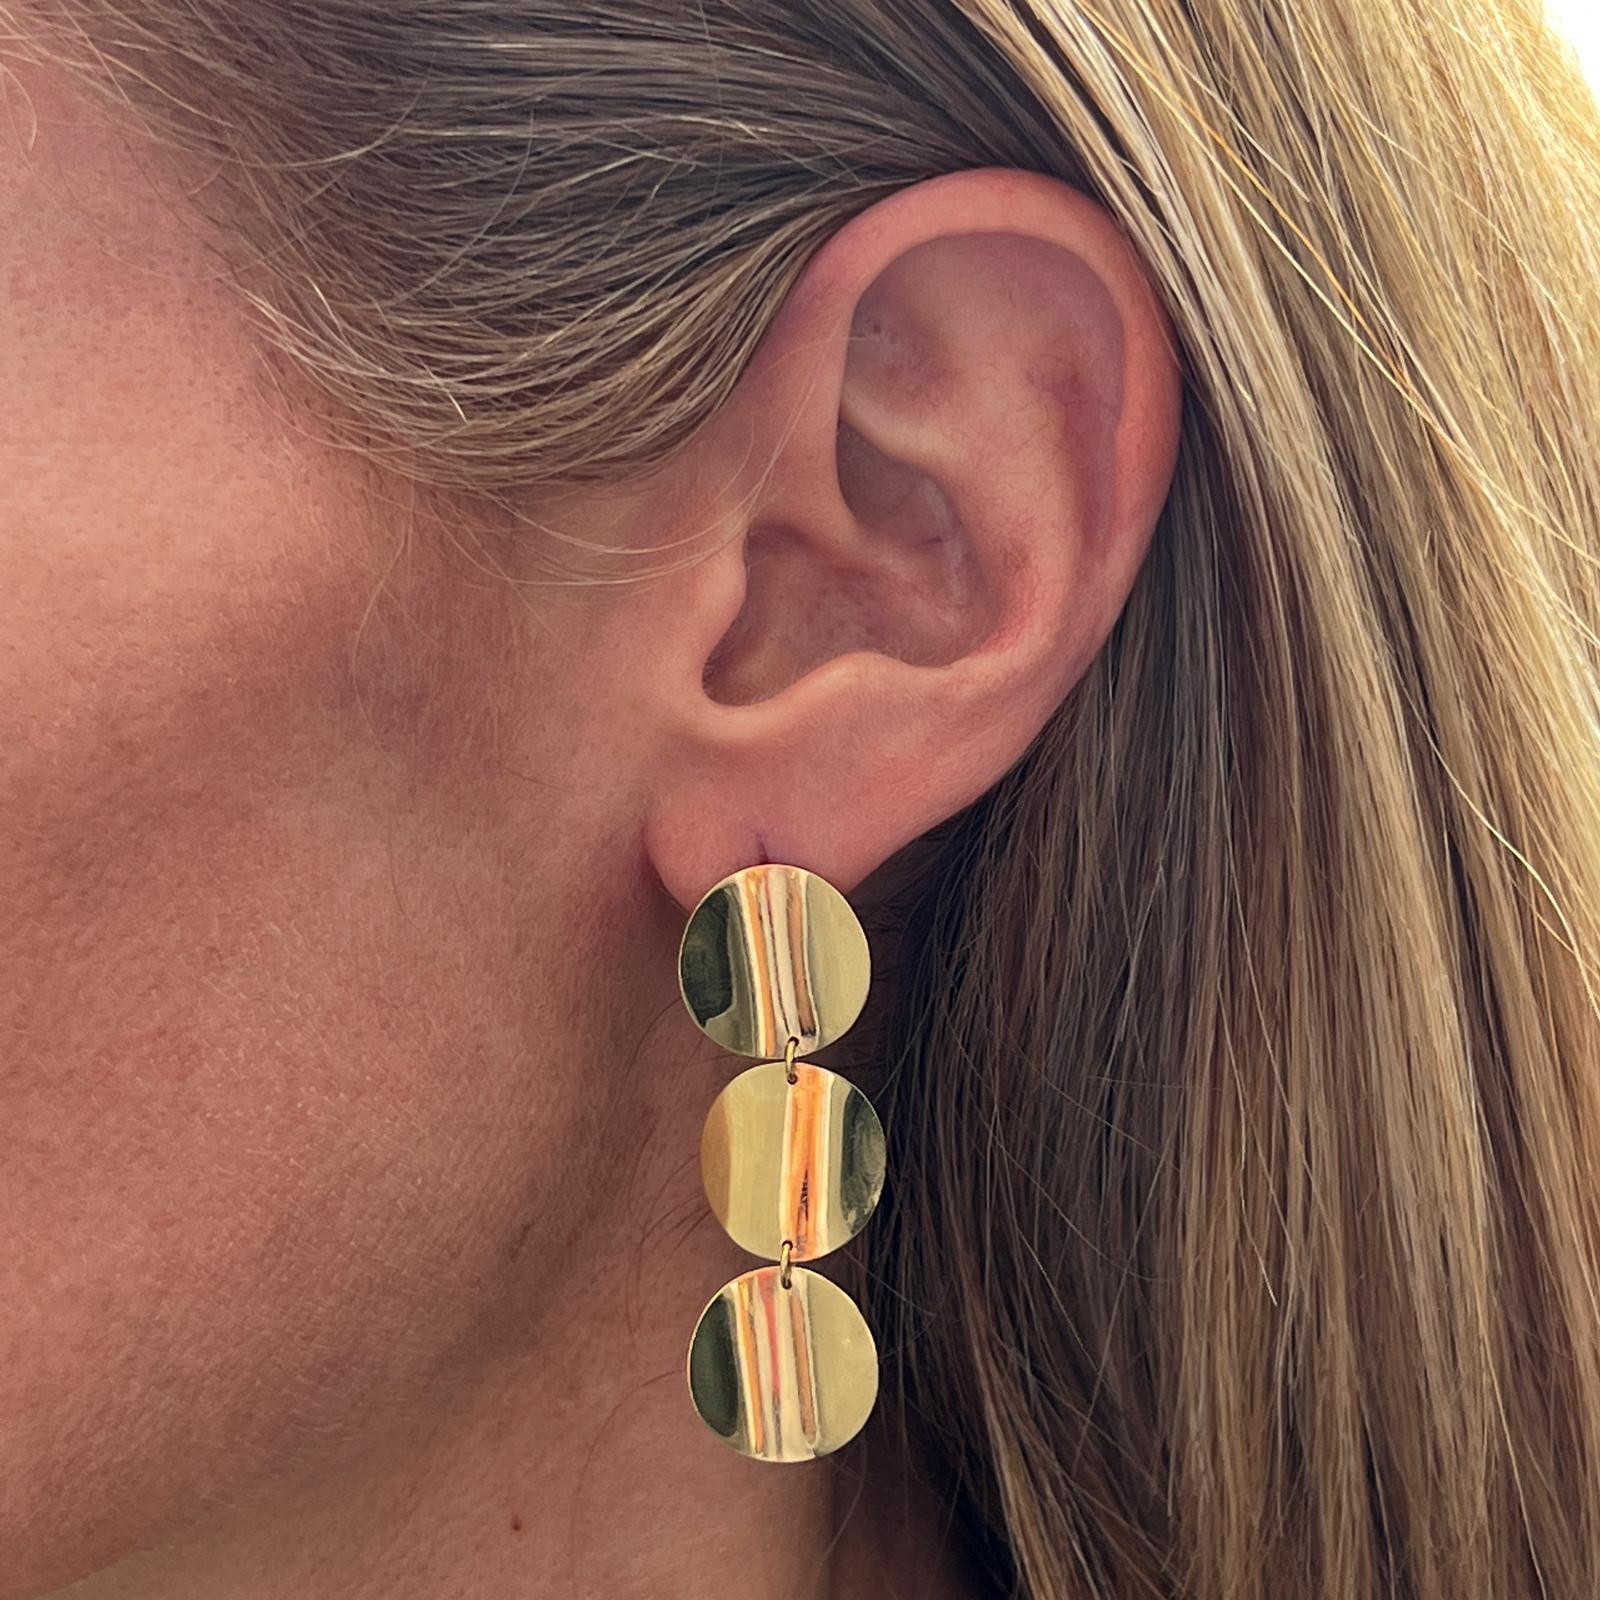 Roberto Coin disc drop earrings crafted in 18 karat yellow gold. The flat disc earrings are lightweight for everyday wear and measure 2.00 inches in length. Roberto Coin's hallmark ruby is on the back. 